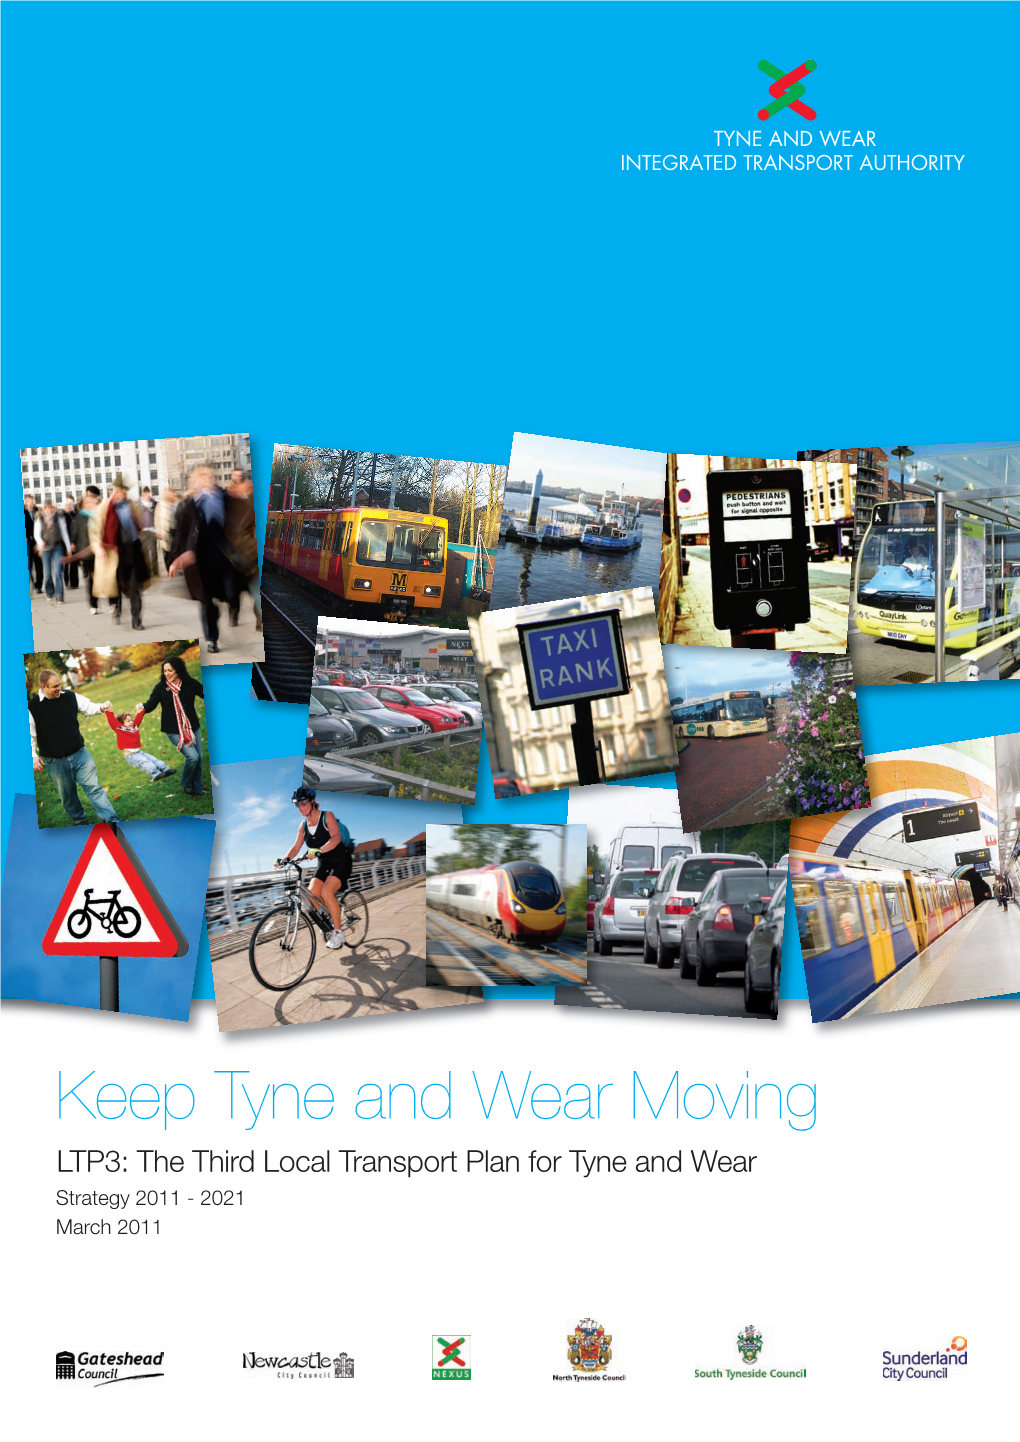 Third Local Transport Strategy 2011 to 2021